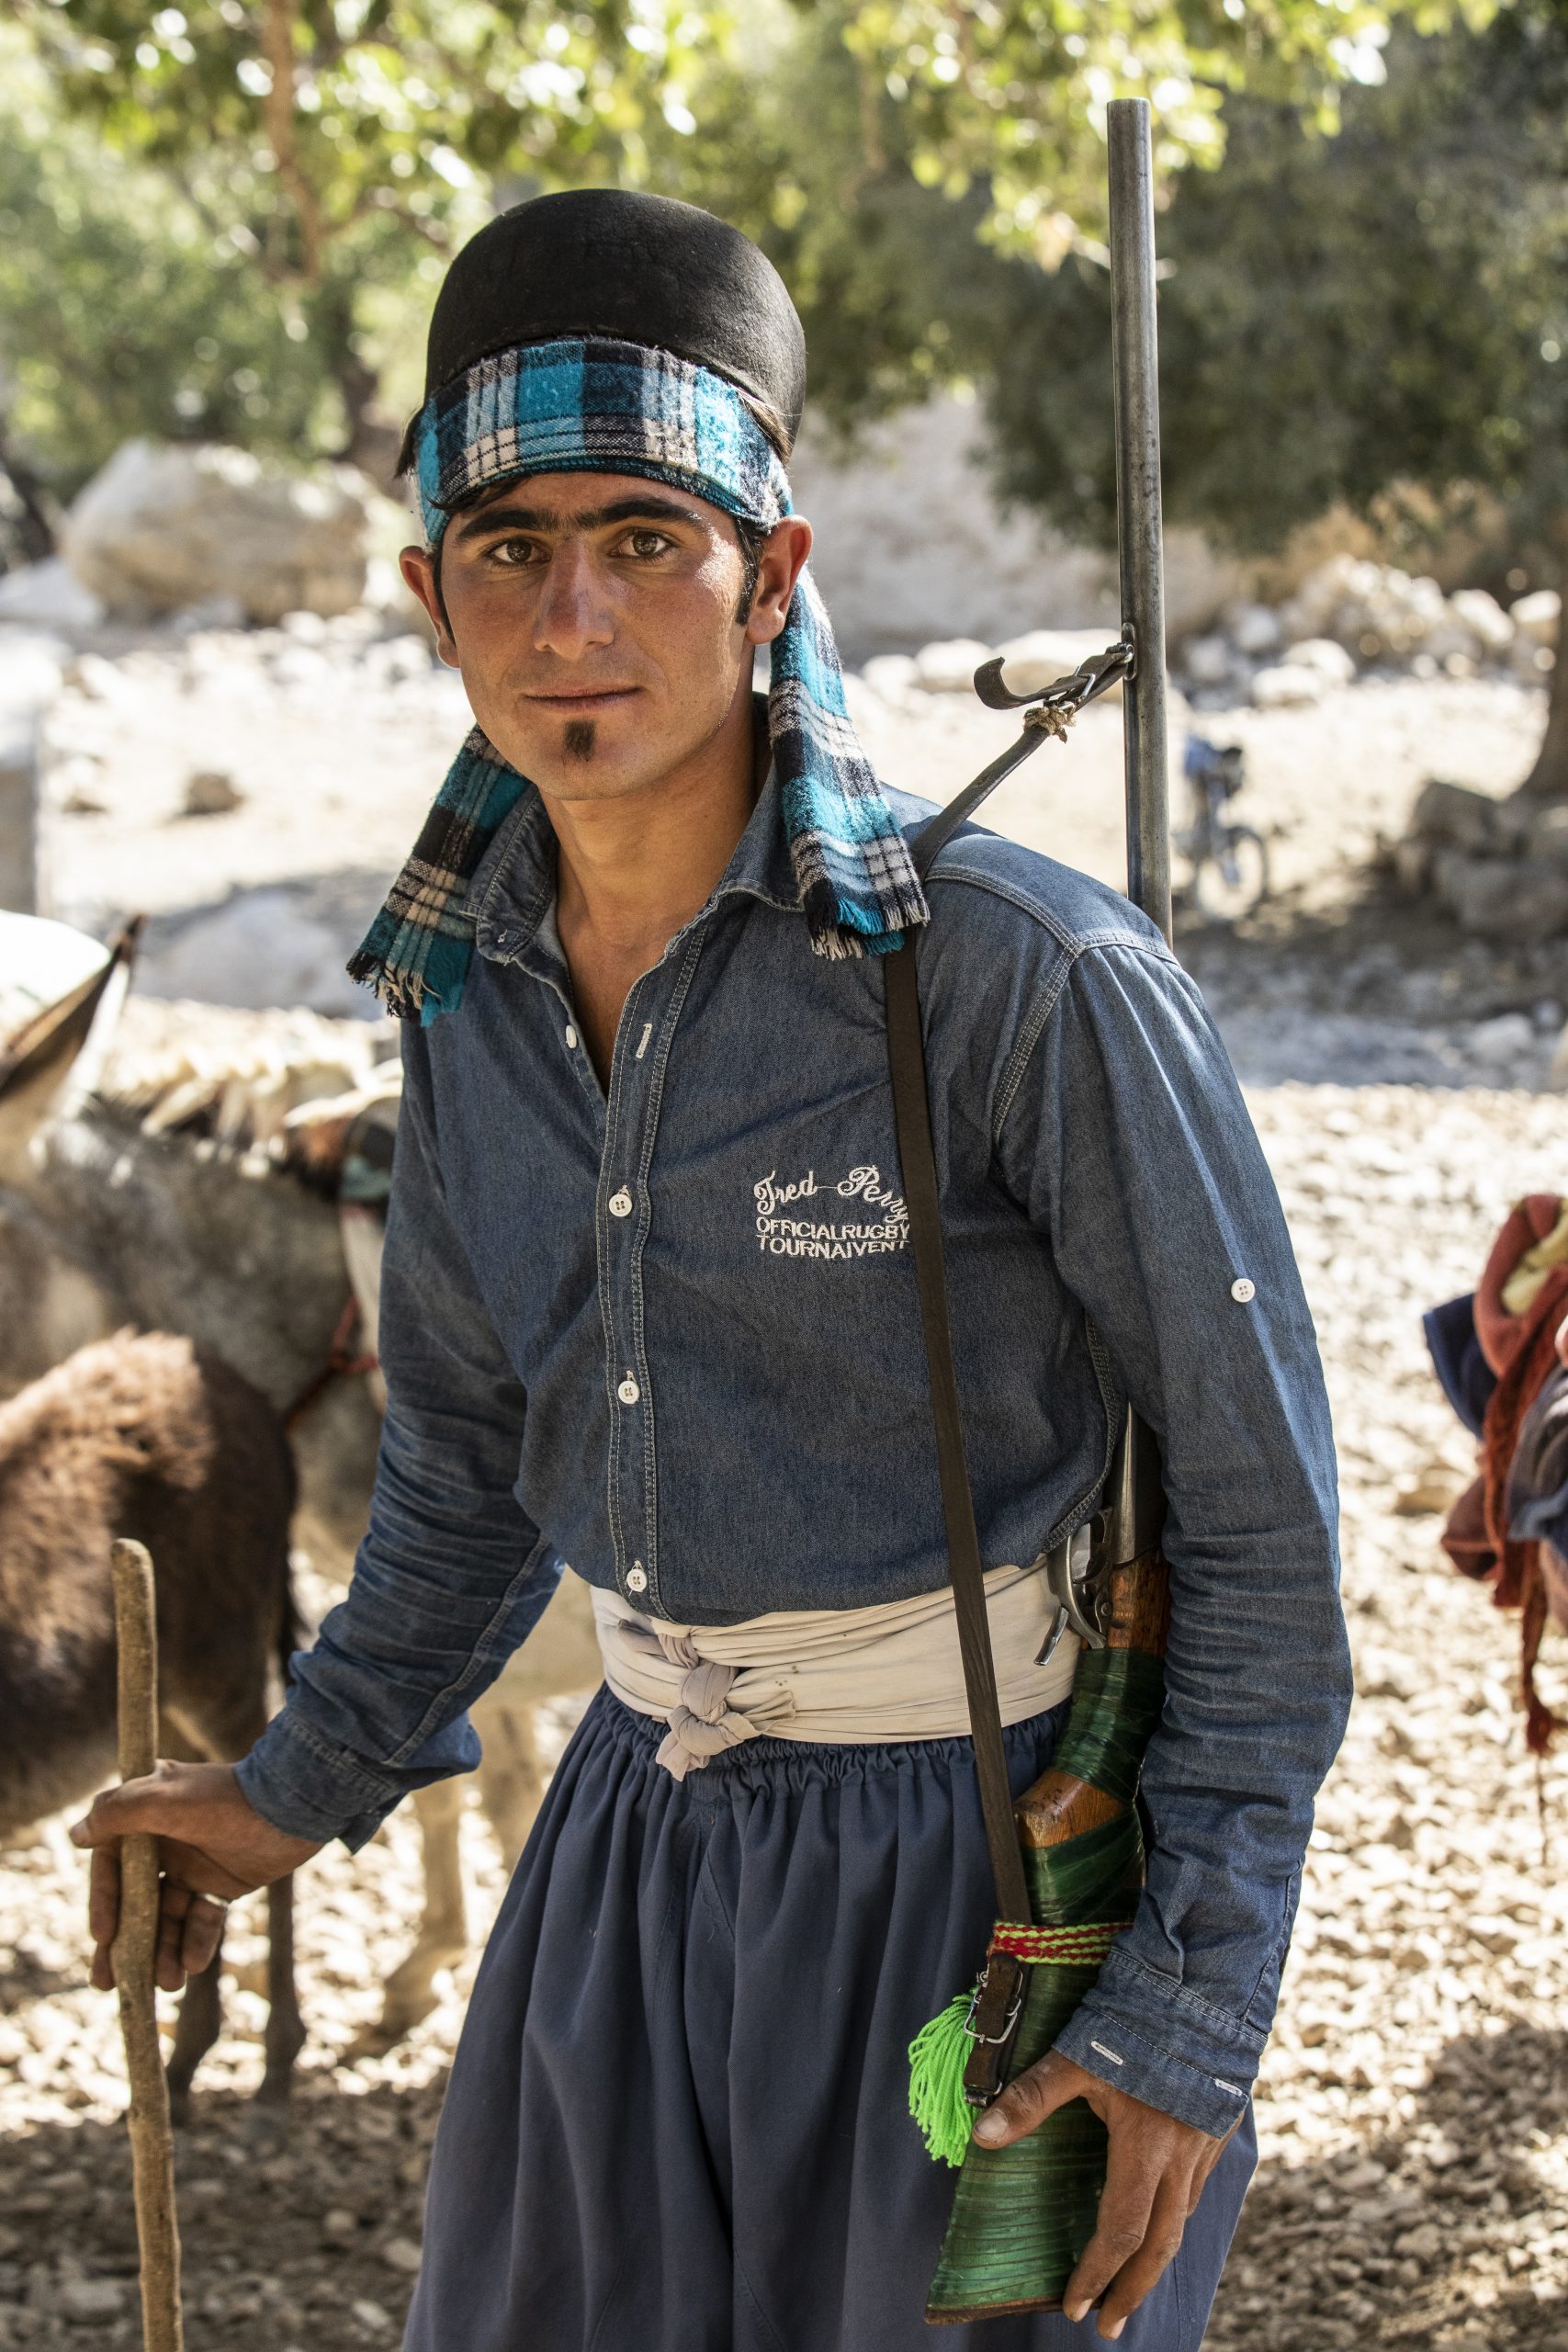 The Faces of Nomads - Middle East Images